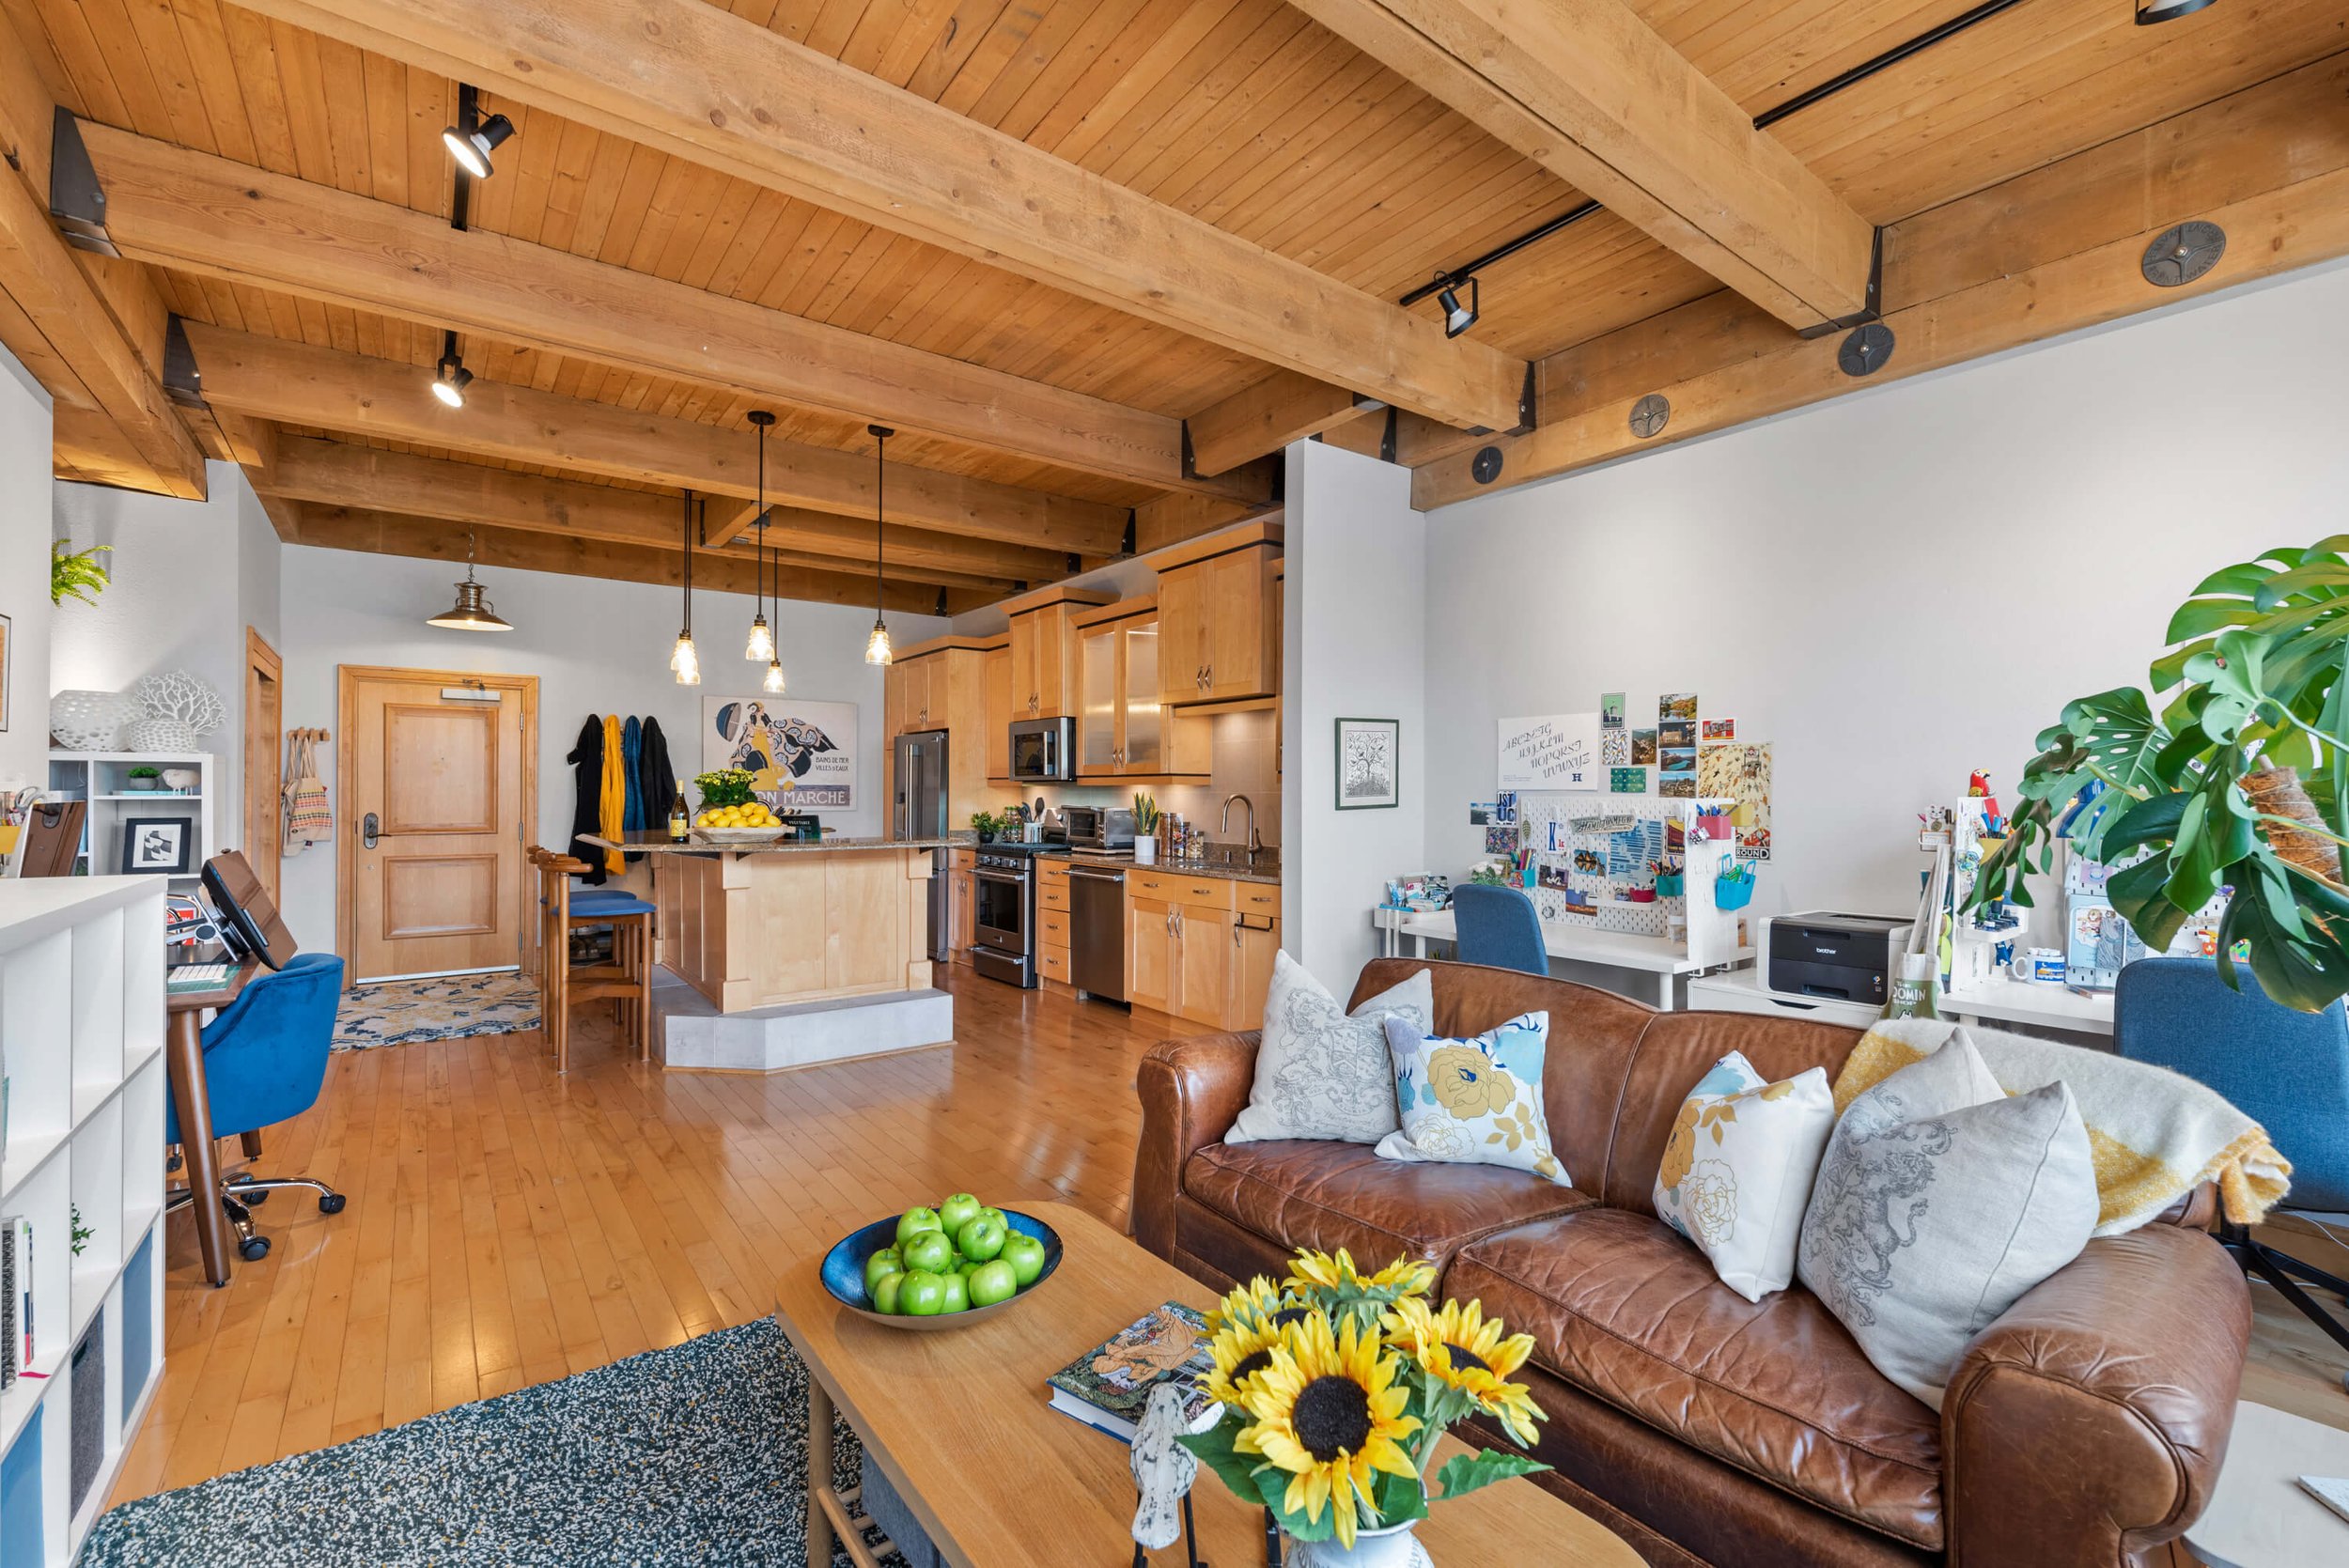 Timber Ceilings and Maple Floors